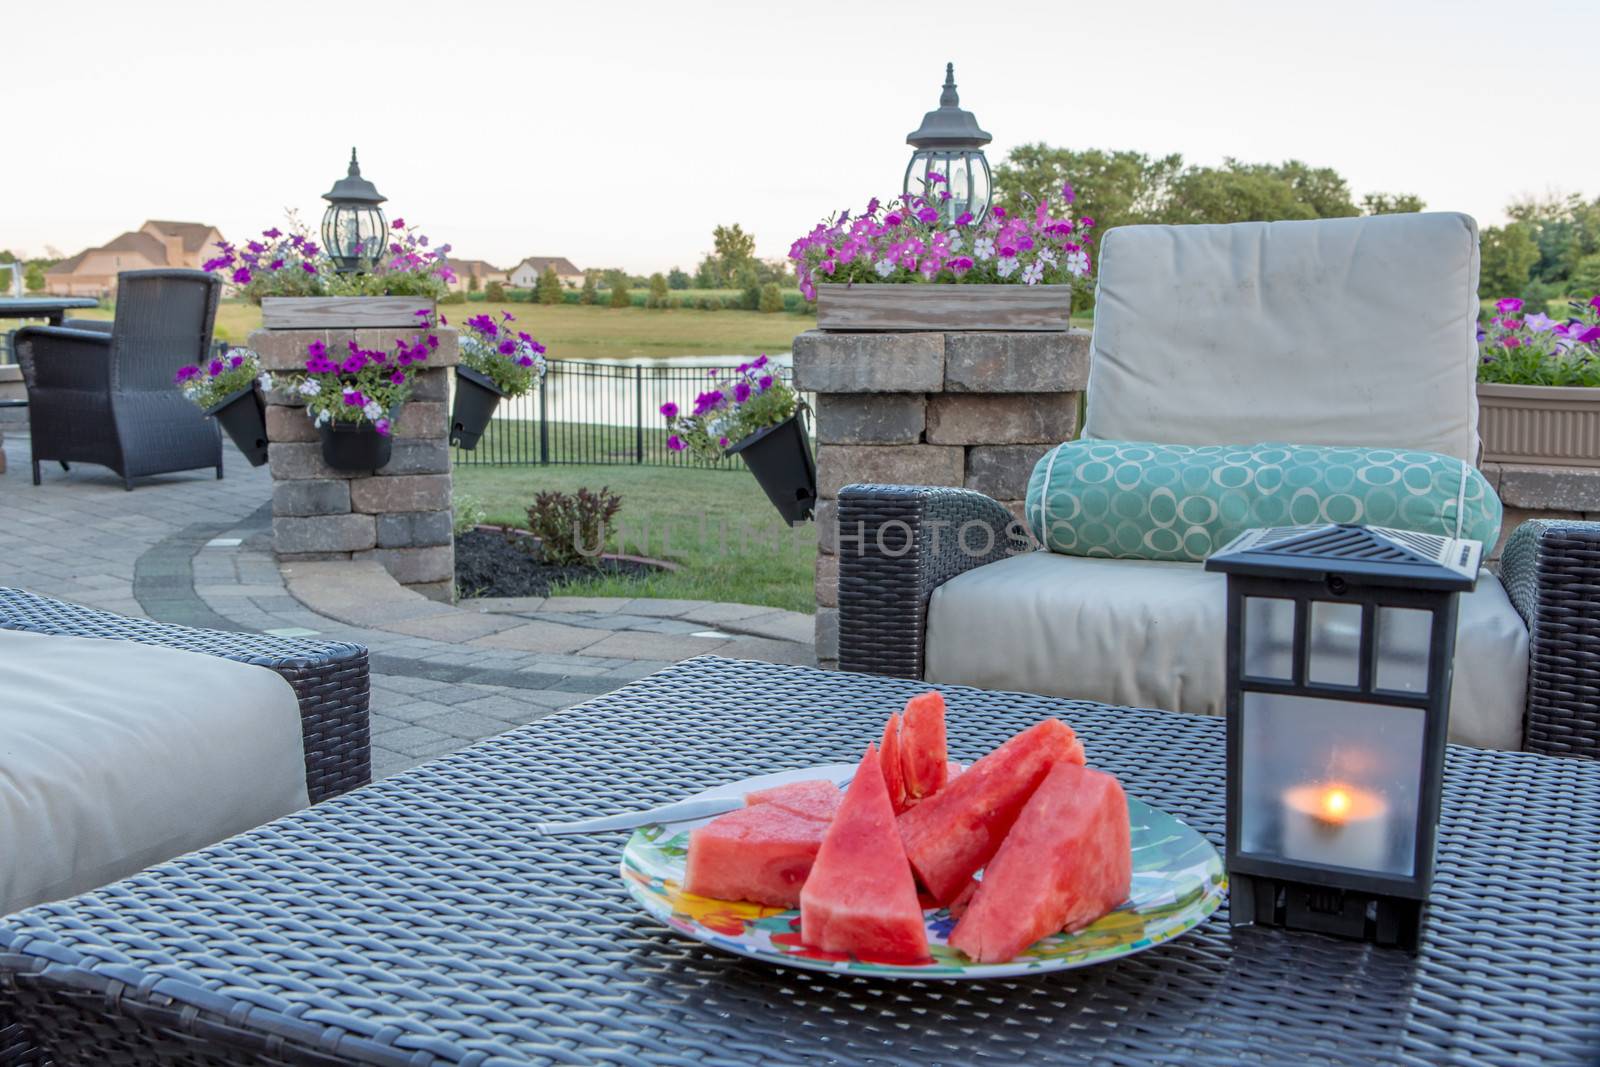 Brick patio and pillars with flower planters on the pillars. Looking  to the lake and watermelon on the table along with fly